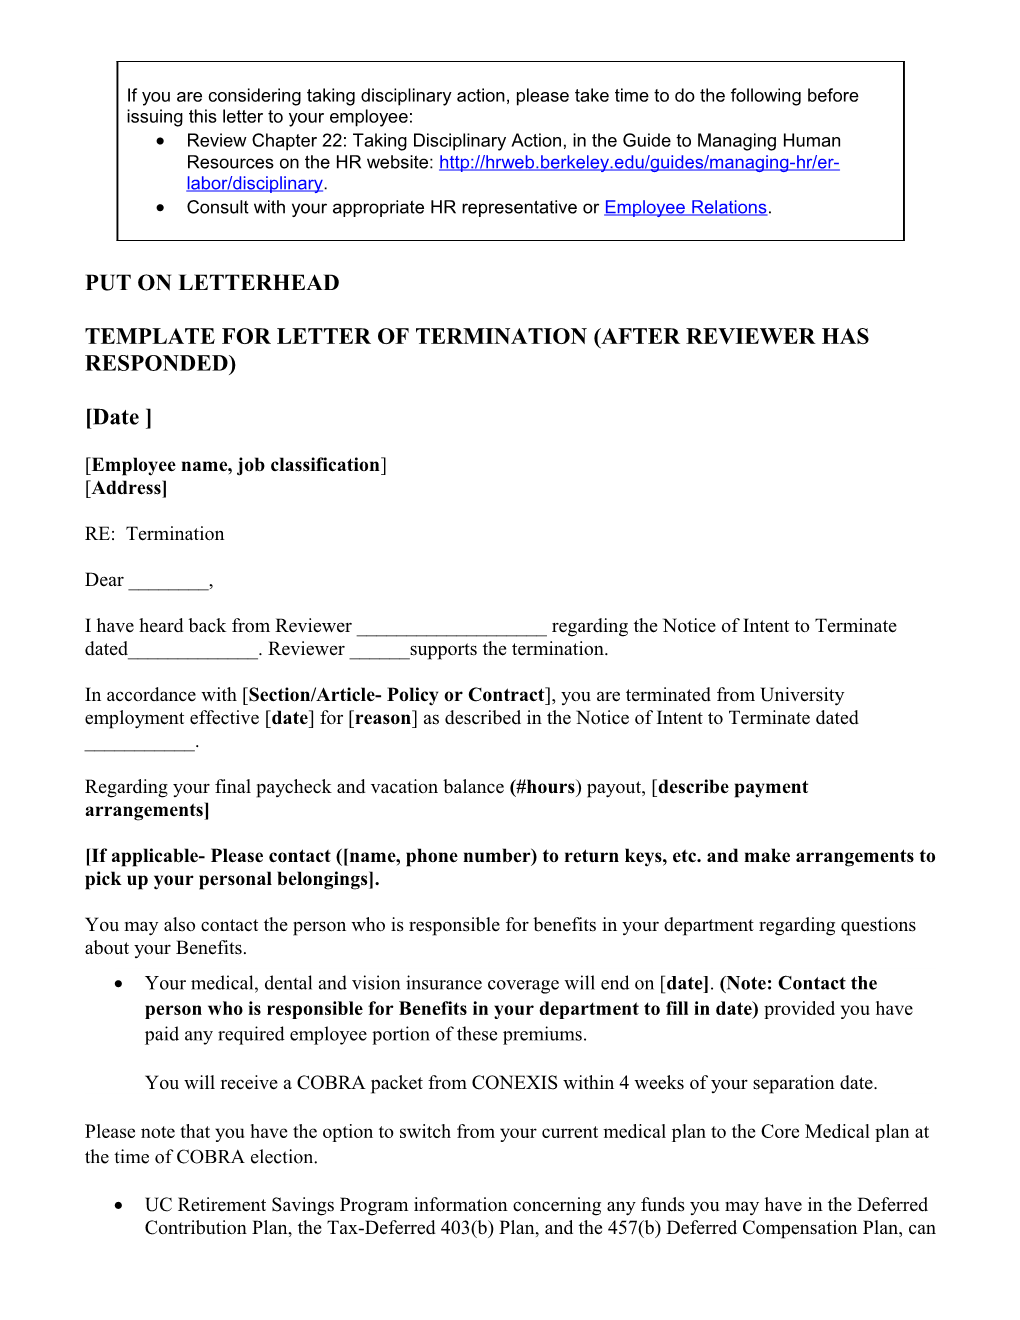 Template for Letter of Termination (After Reviewer Has Responded)